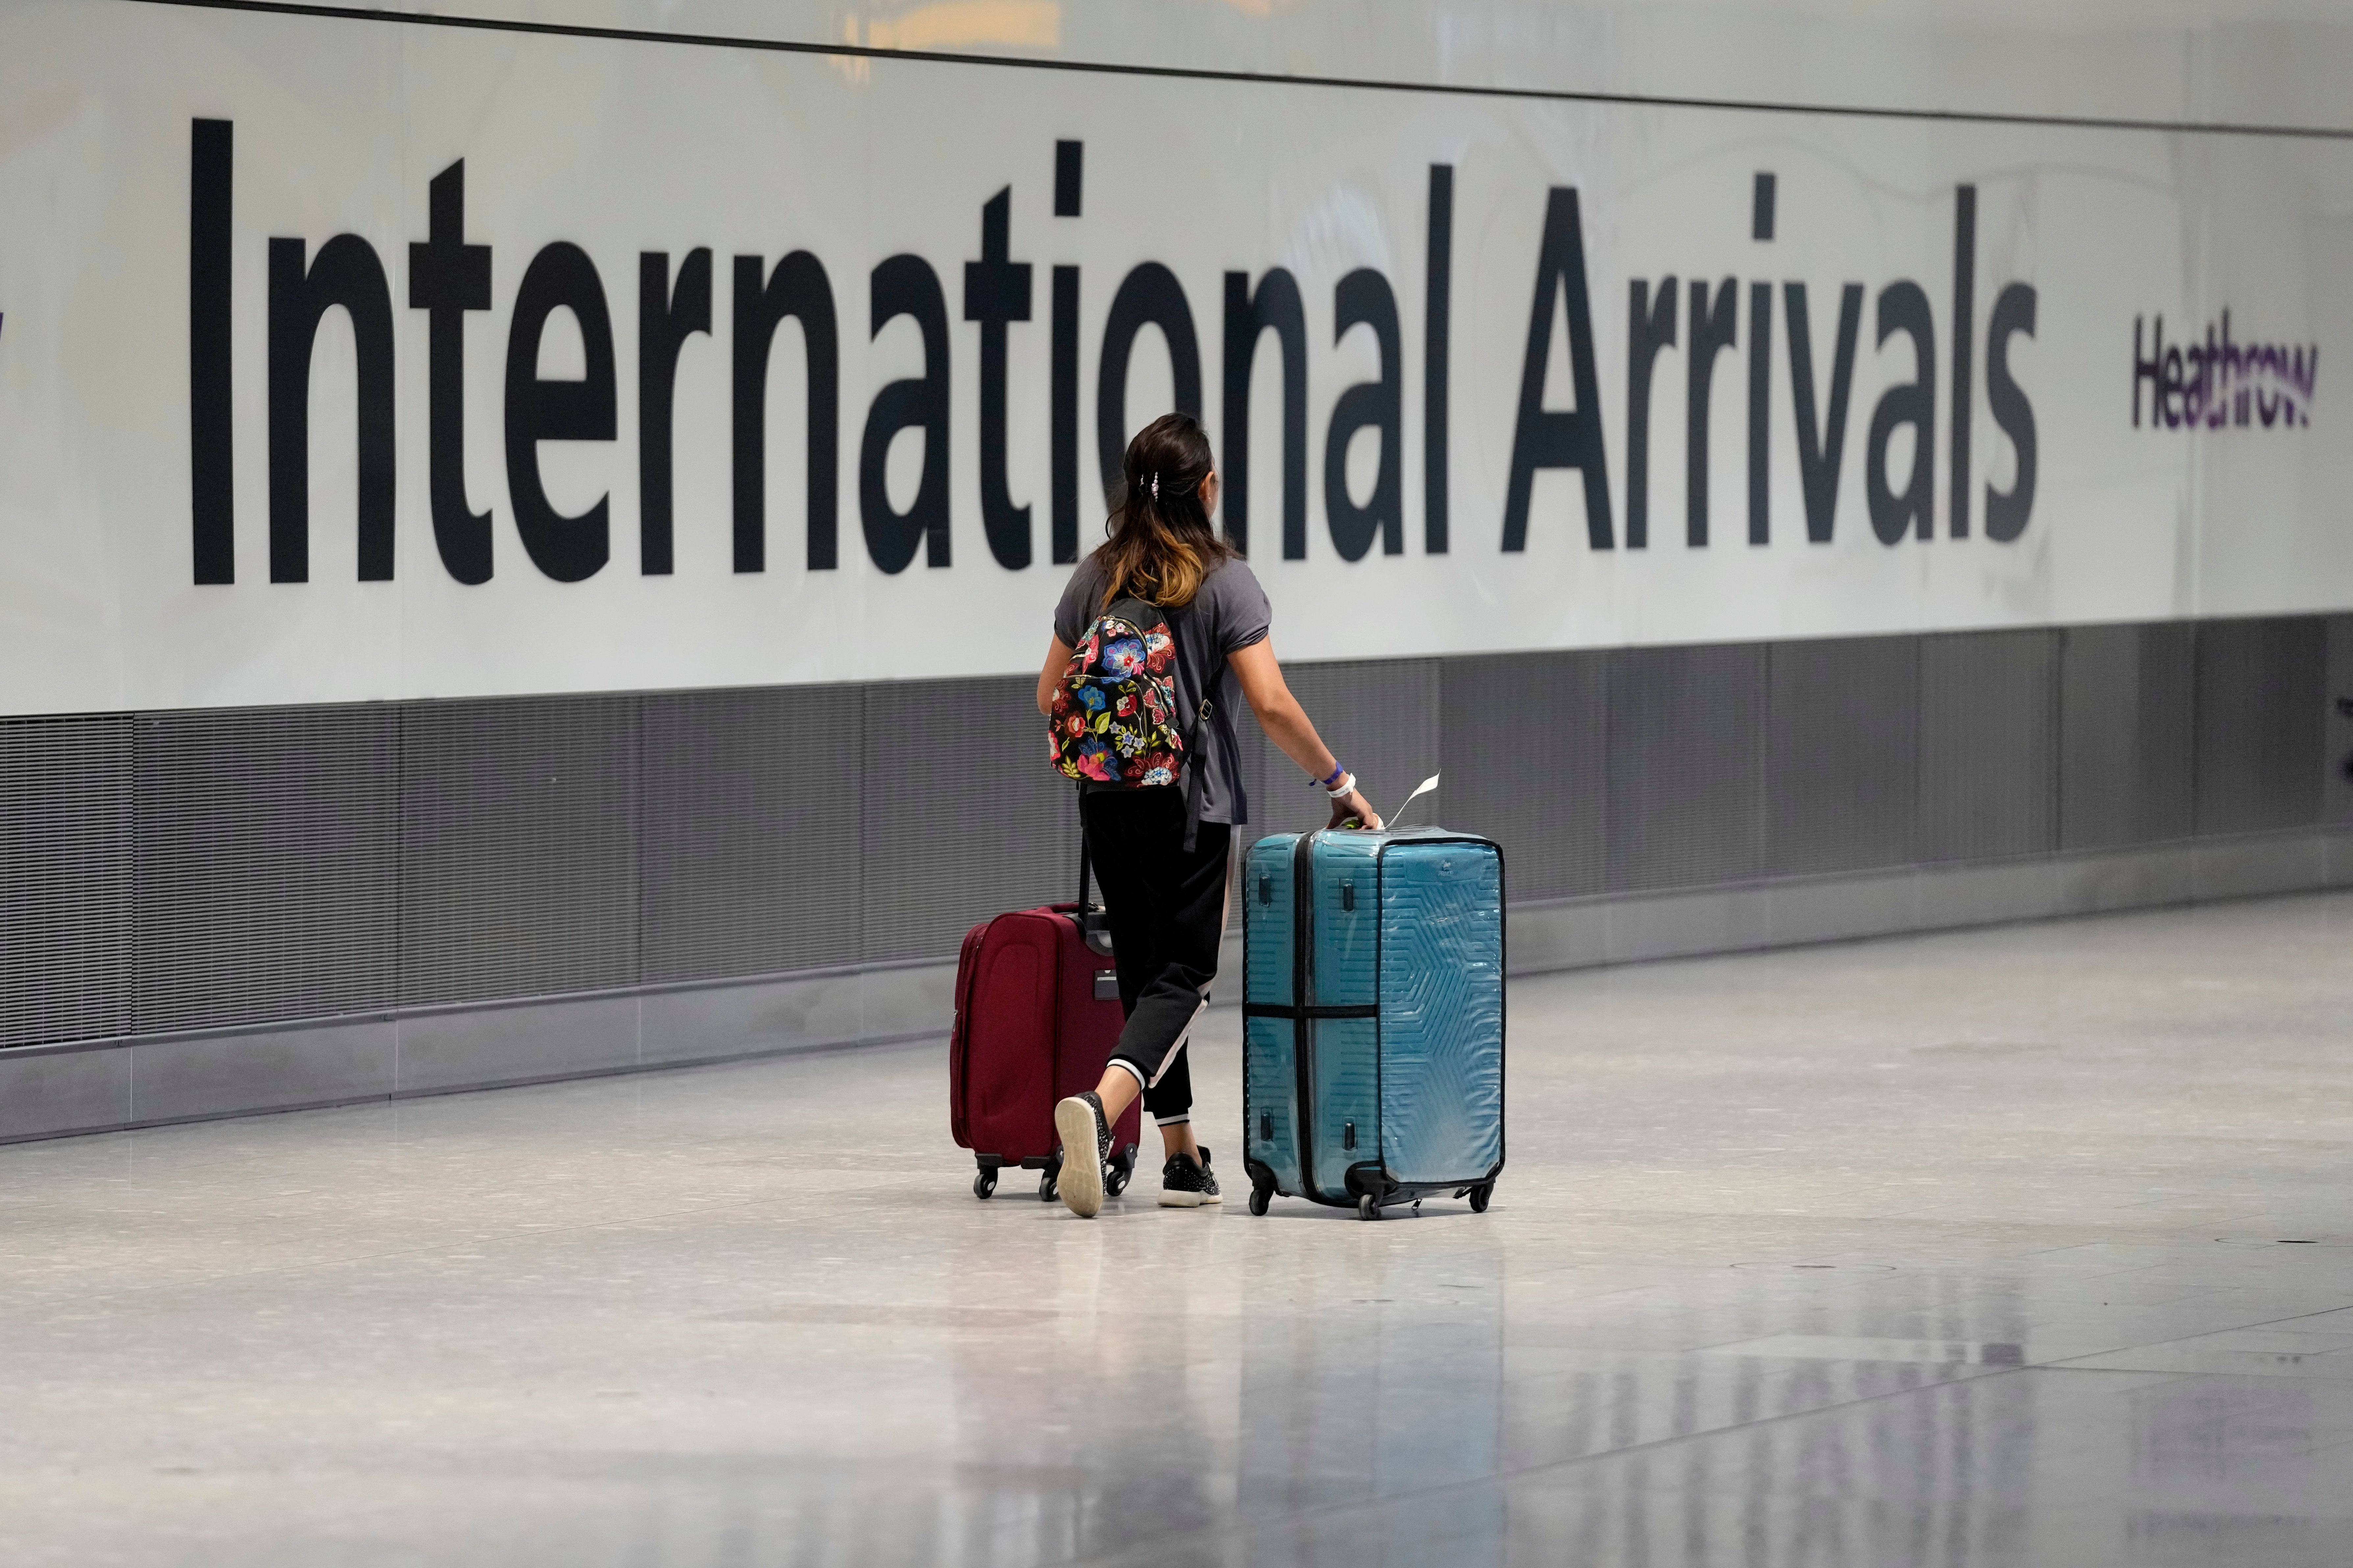 Passenger numbers at the UK’s biggest airport are steadily rising